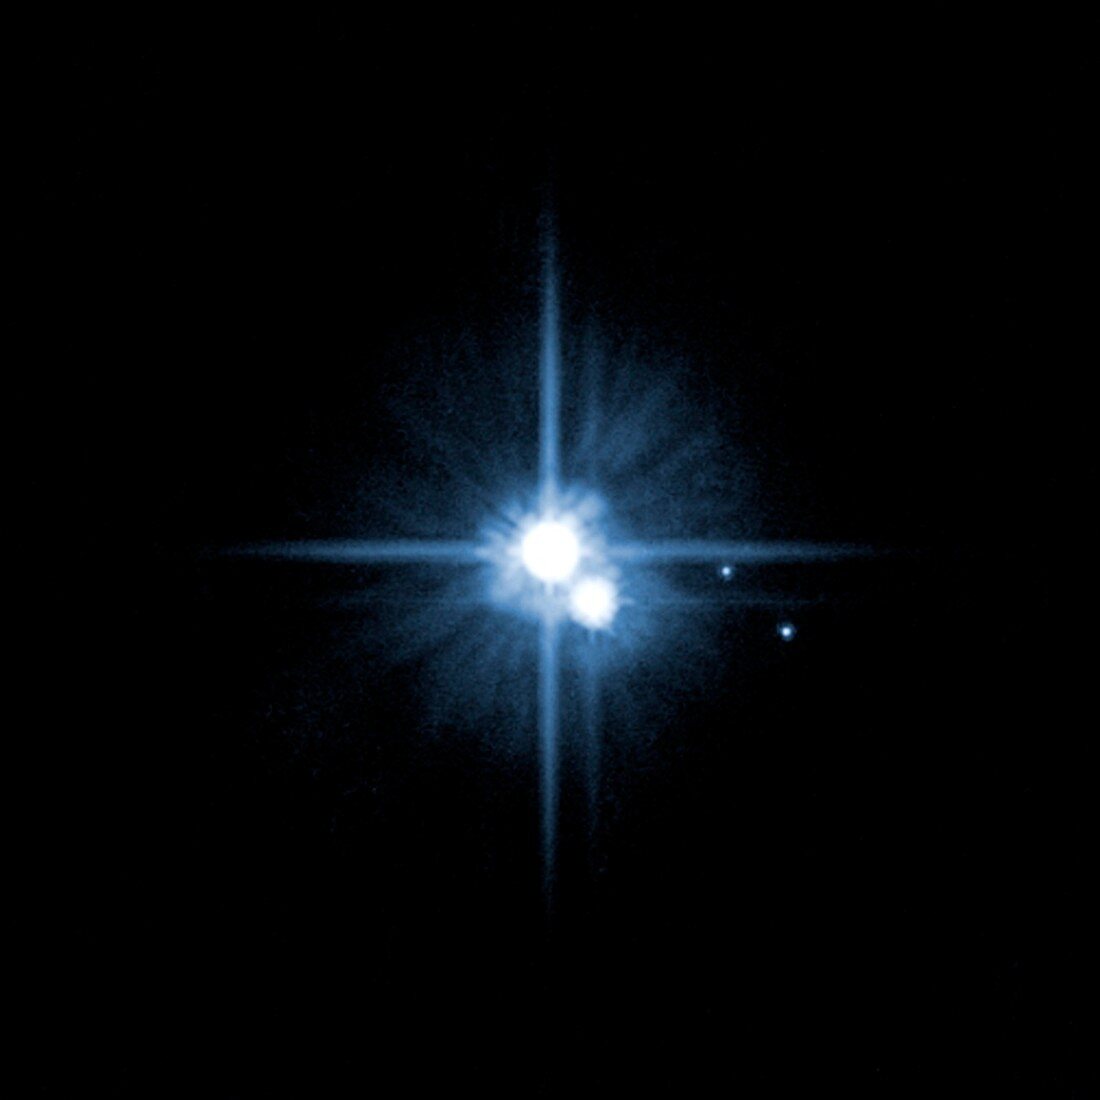 Pluto and its moons,Hubble image